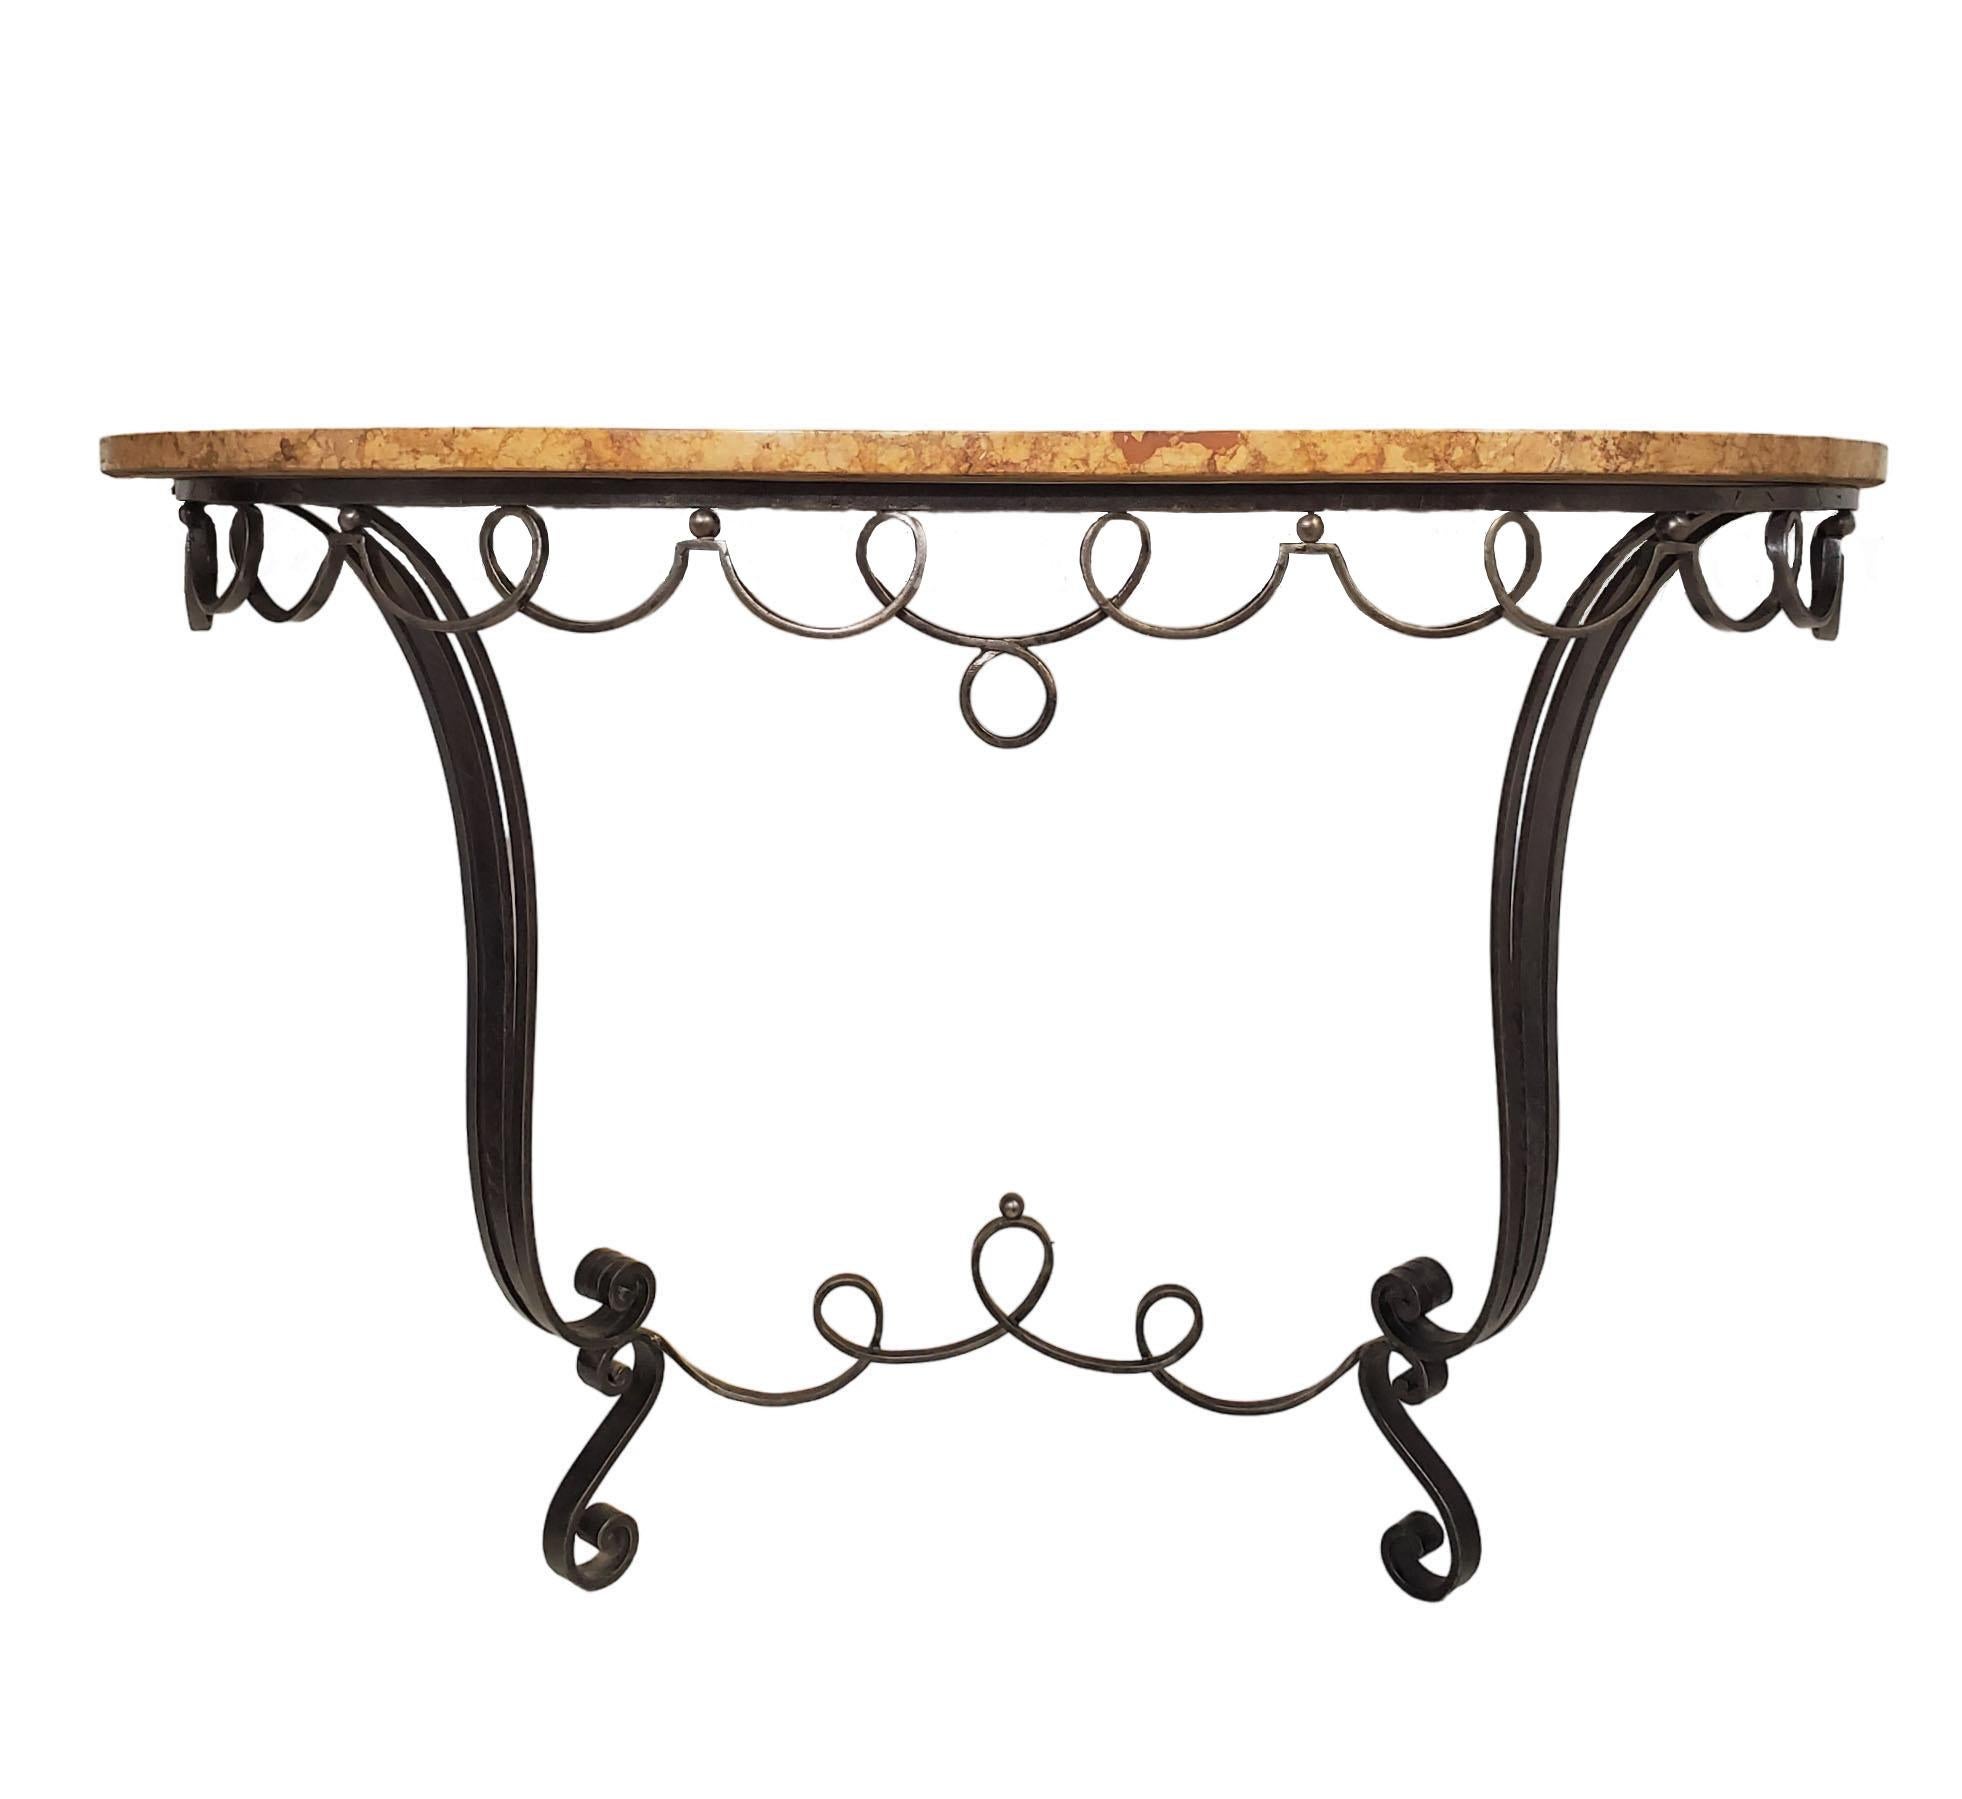 An original French Art Deco elegantly shaped demi-lune console. The base skillfully crafted from hand-forged iron features a lyrical, scrolling, curvilinear apron supporting its original and warmly toned breche marble top.
The color of the marble